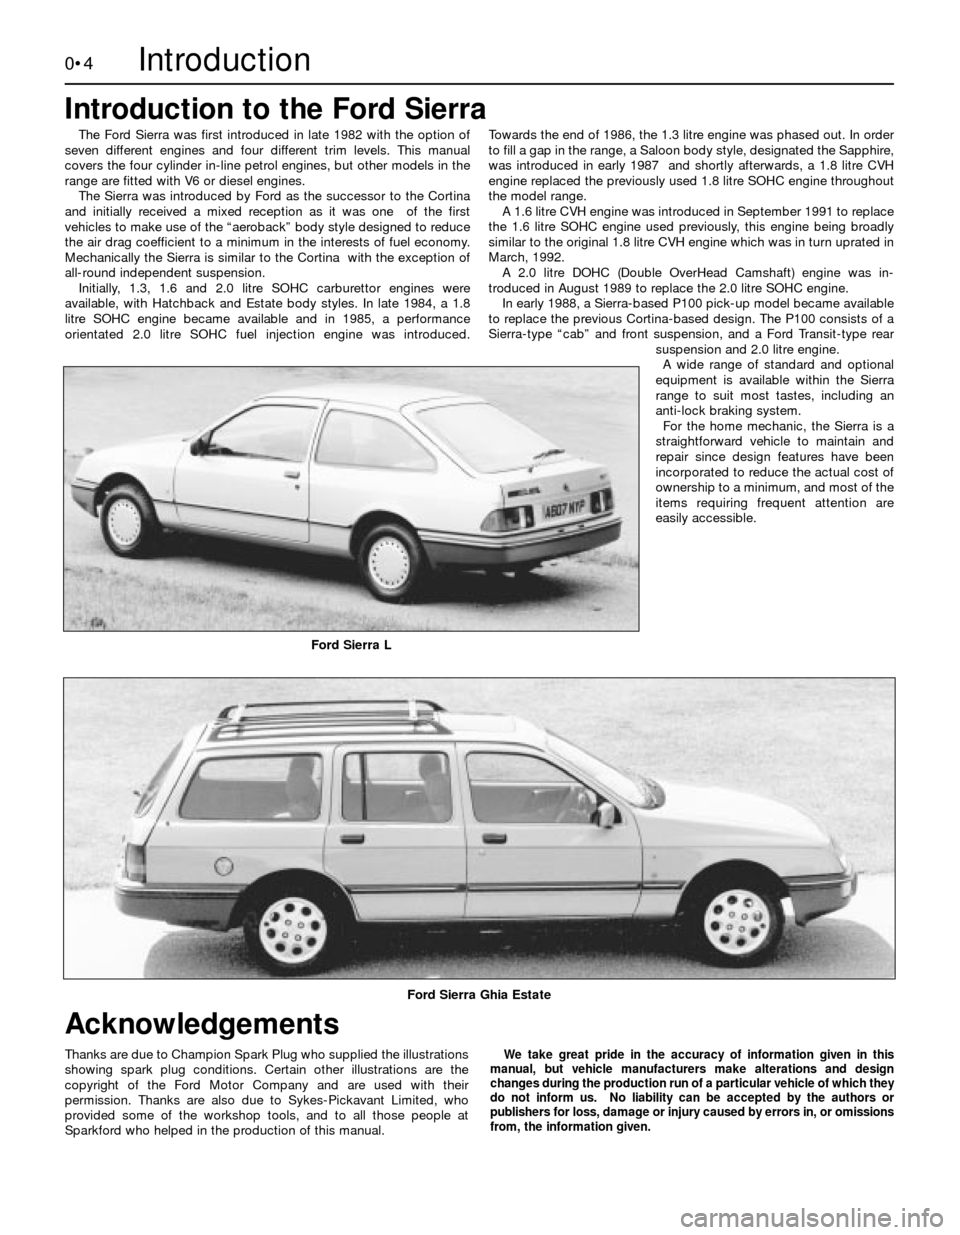 FORD SIERRA 1989 2.G Introduction Workshop Manual 0•4
The Ford Sierra was first introduced in late 1982 with the option of
seven different engines and four different trim levels. This manual
covers the four cylinder in-line petrol engines, but othe